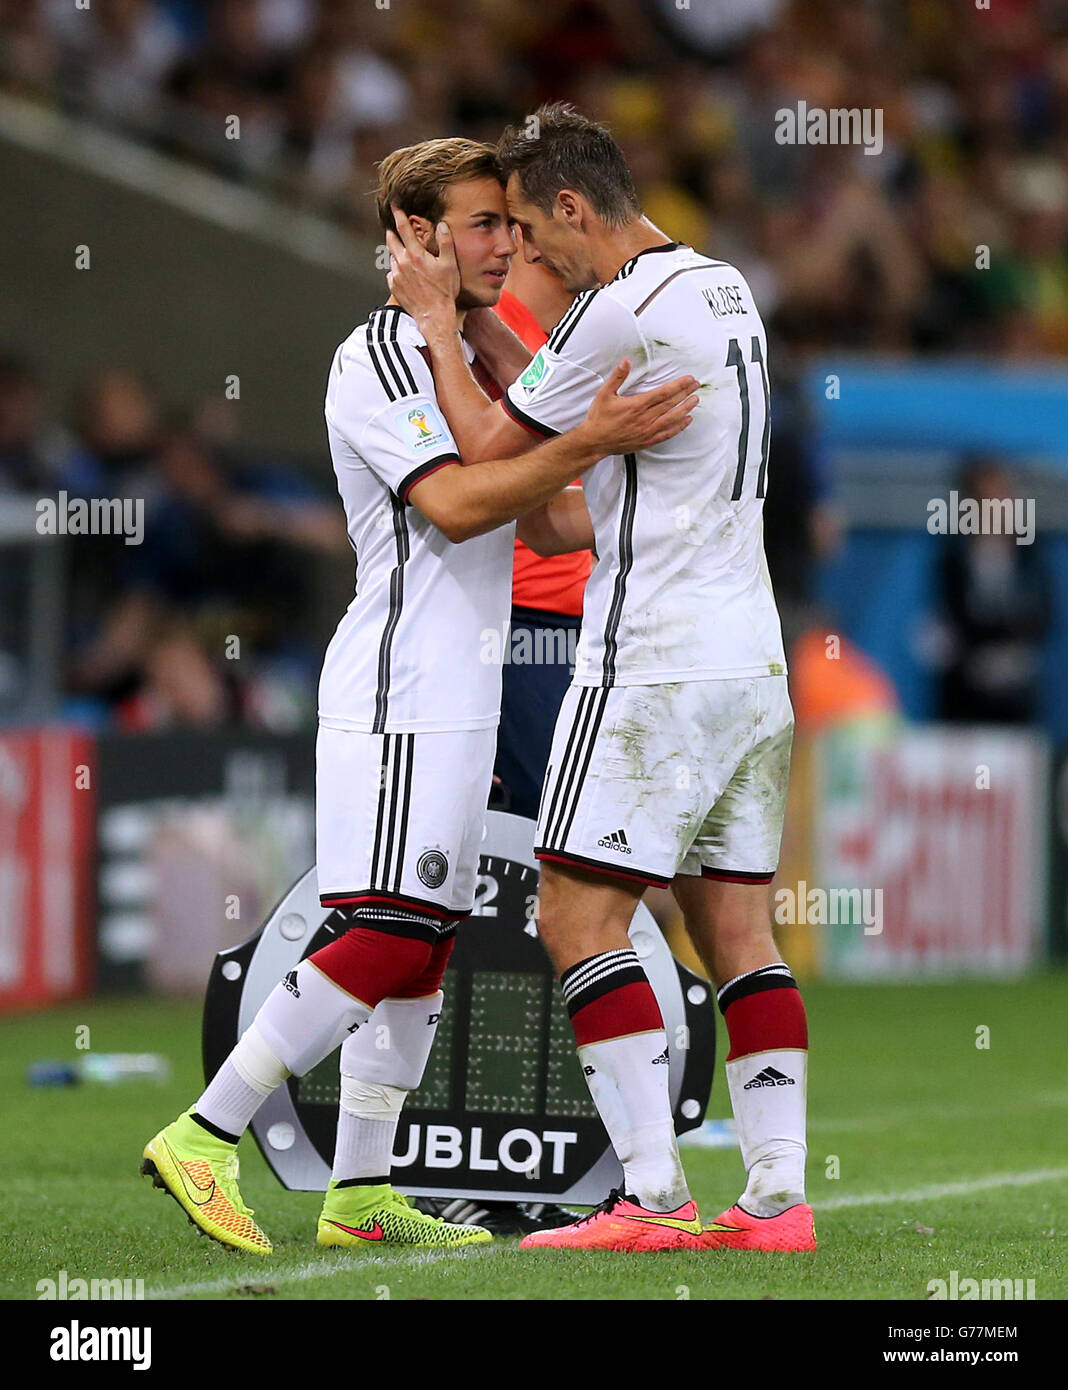 Soccer - FIFA World Cup 2014 - Final - Germany v Argentina - Estadio do Maracana. Germany's Miroslav Klose embraces team-mate Mario Gotze as he comes on to replace him Stock Photo